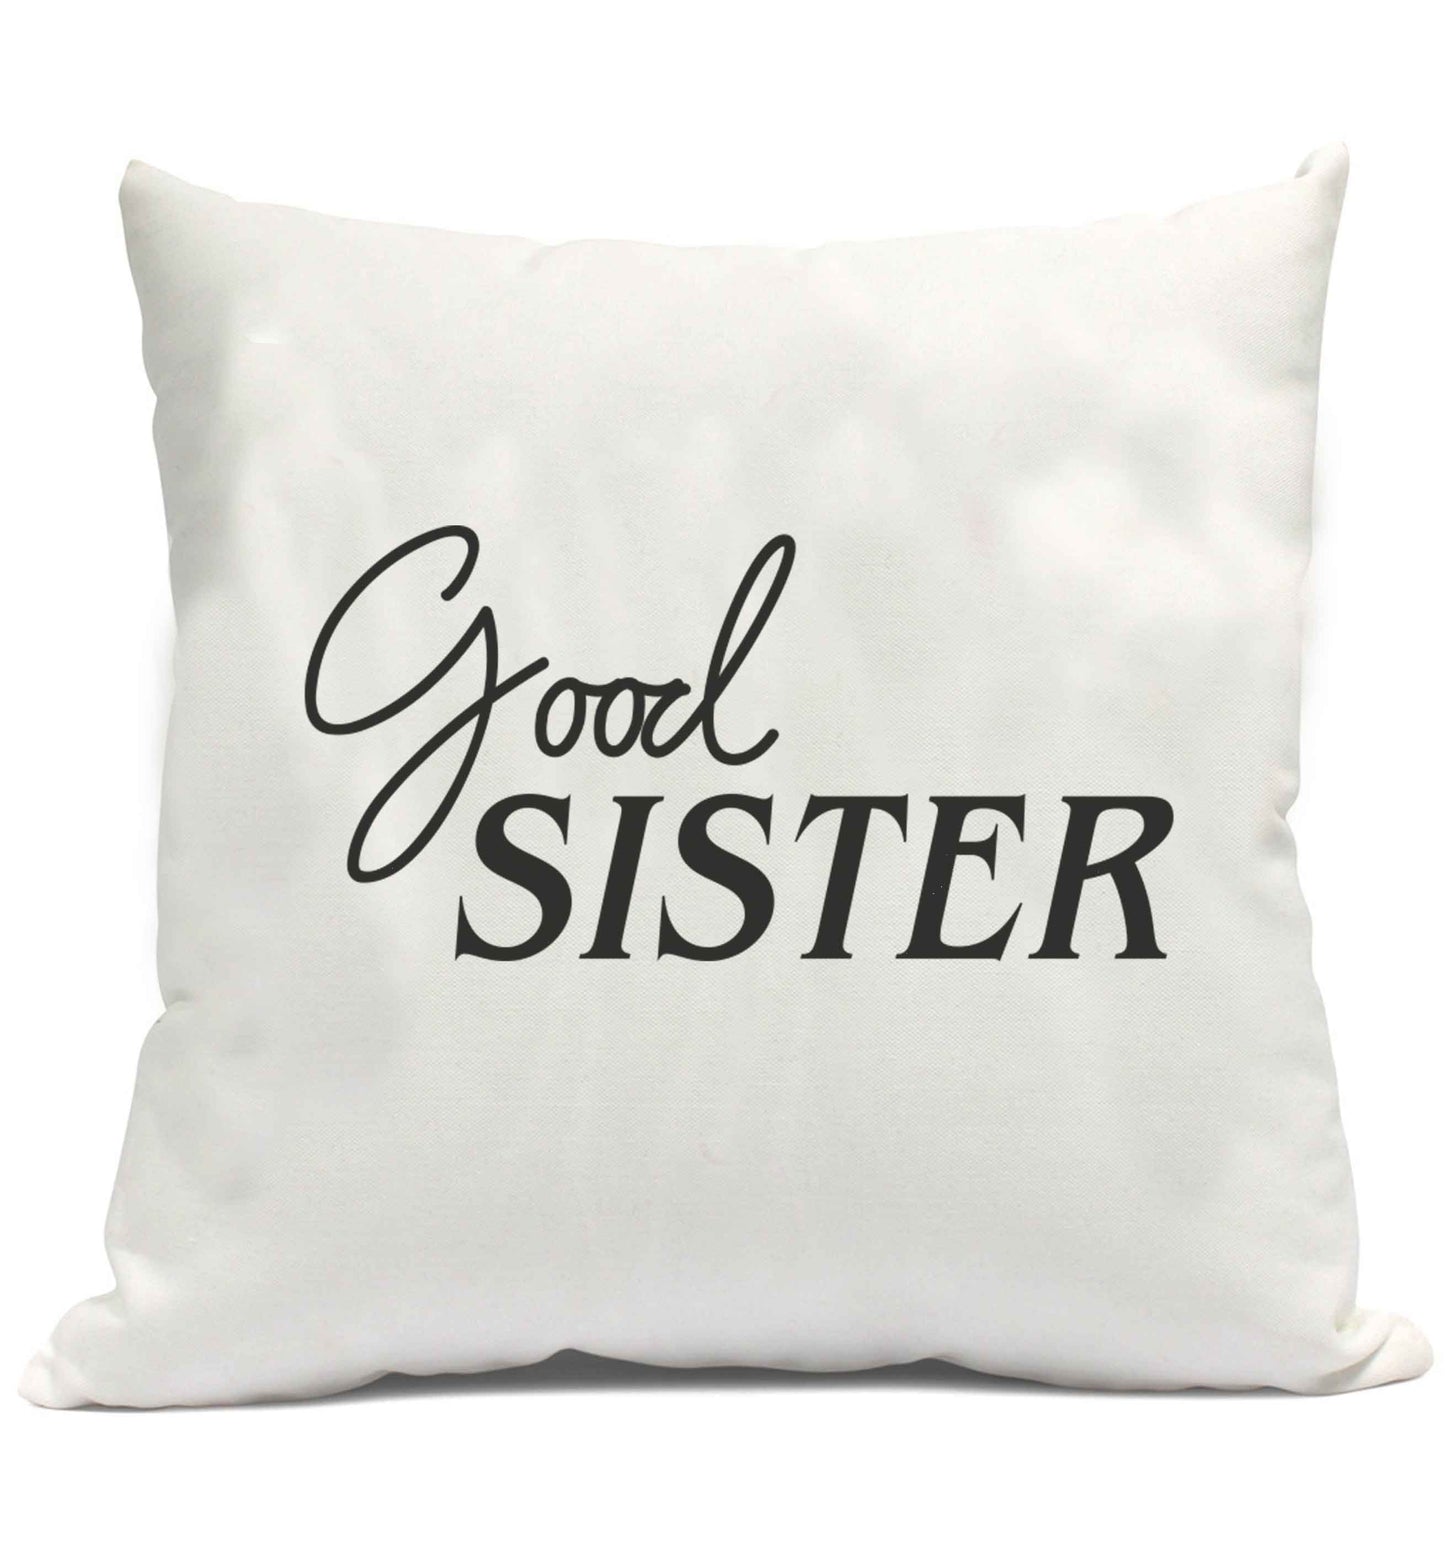 Good sister cushion cover and filling